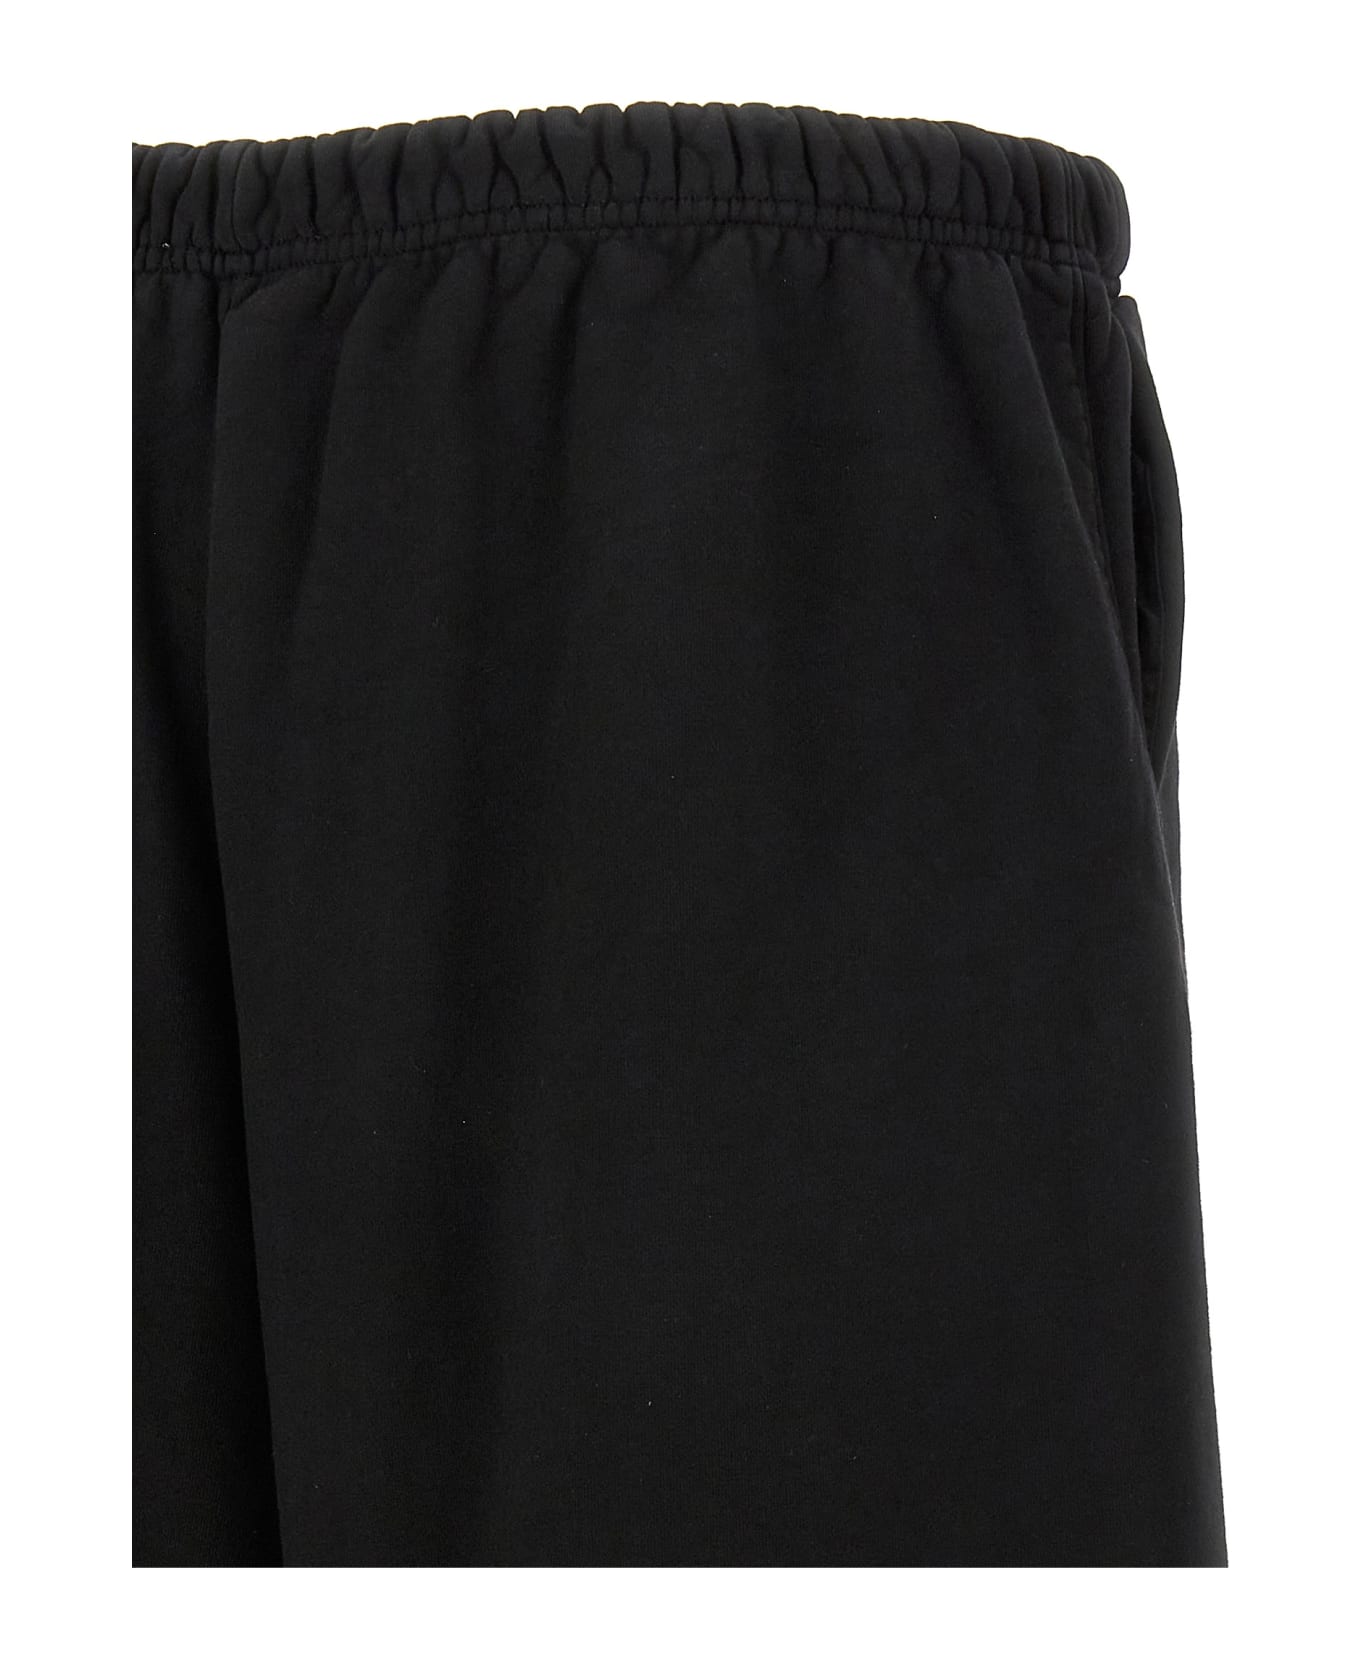 Fear of God 'relaxed' Shorts - Black  